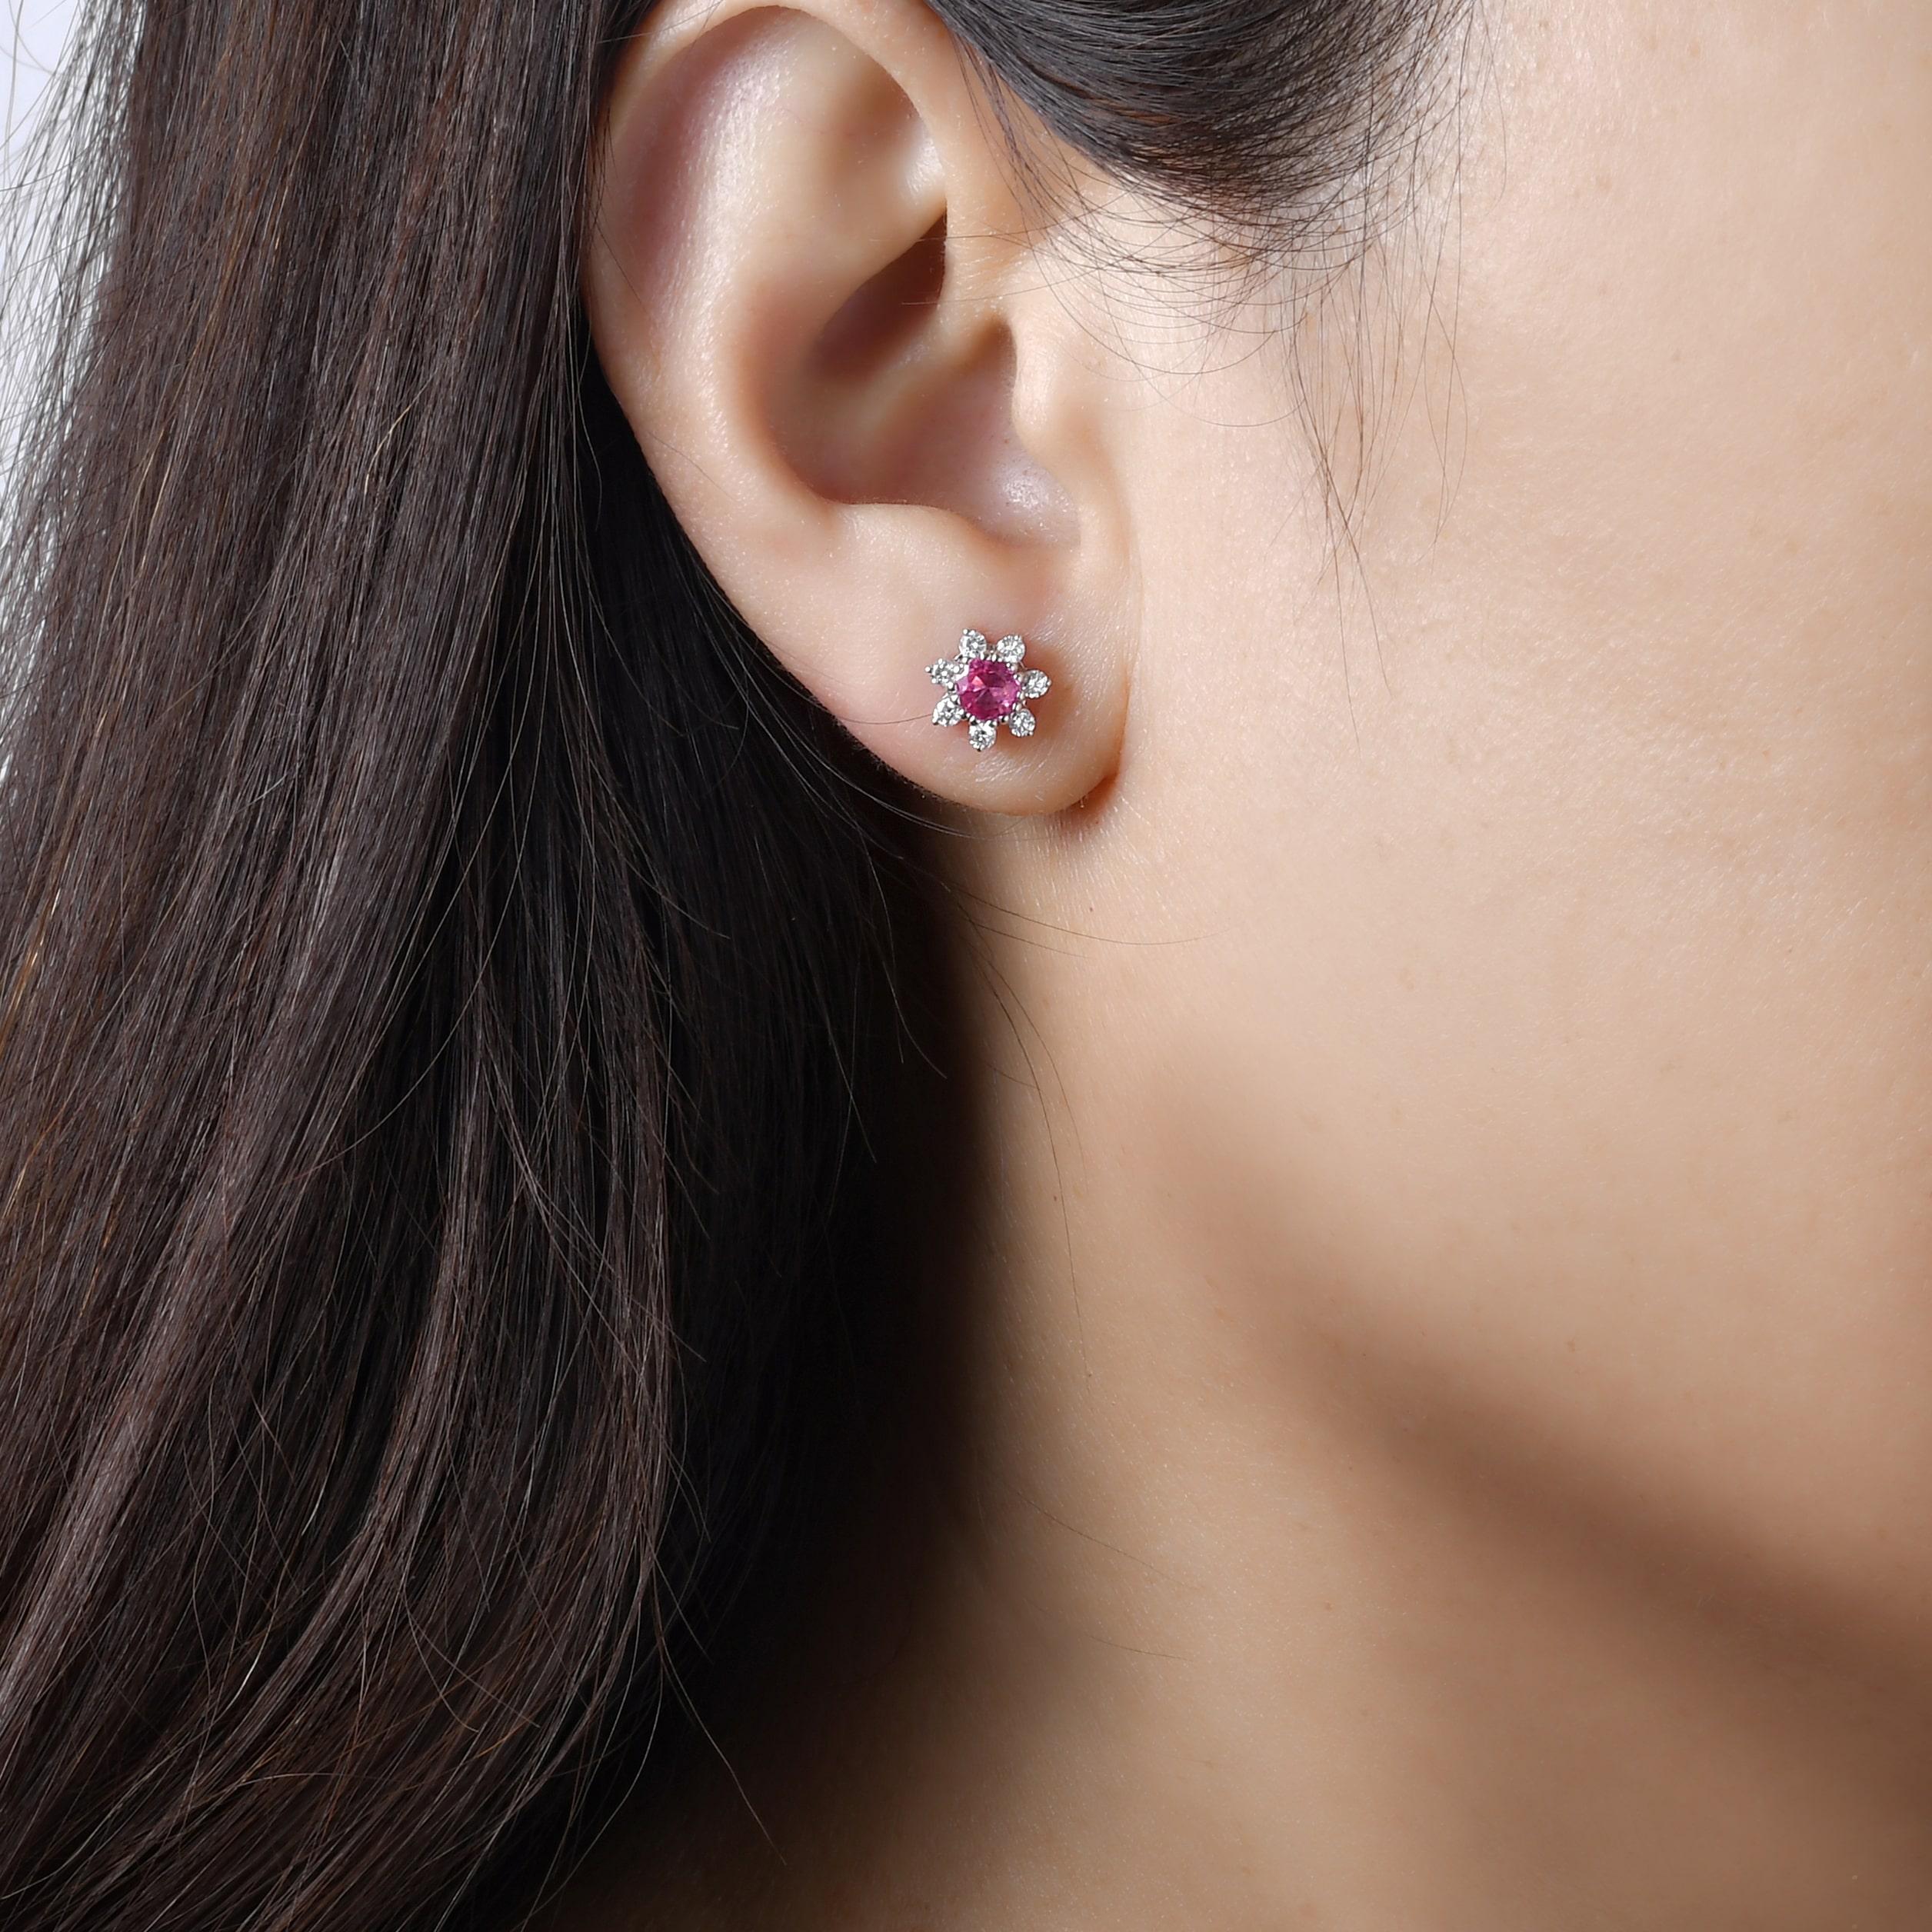 Indulge in luxury with our Spinel and Diamond Pendant. Handcrafted with 18K white gold, these stud earrings showcases a pair of stunning raspberry spinel surrounded by sparkling VS quality diamonds. Elevate your style with this high-quality gemstone